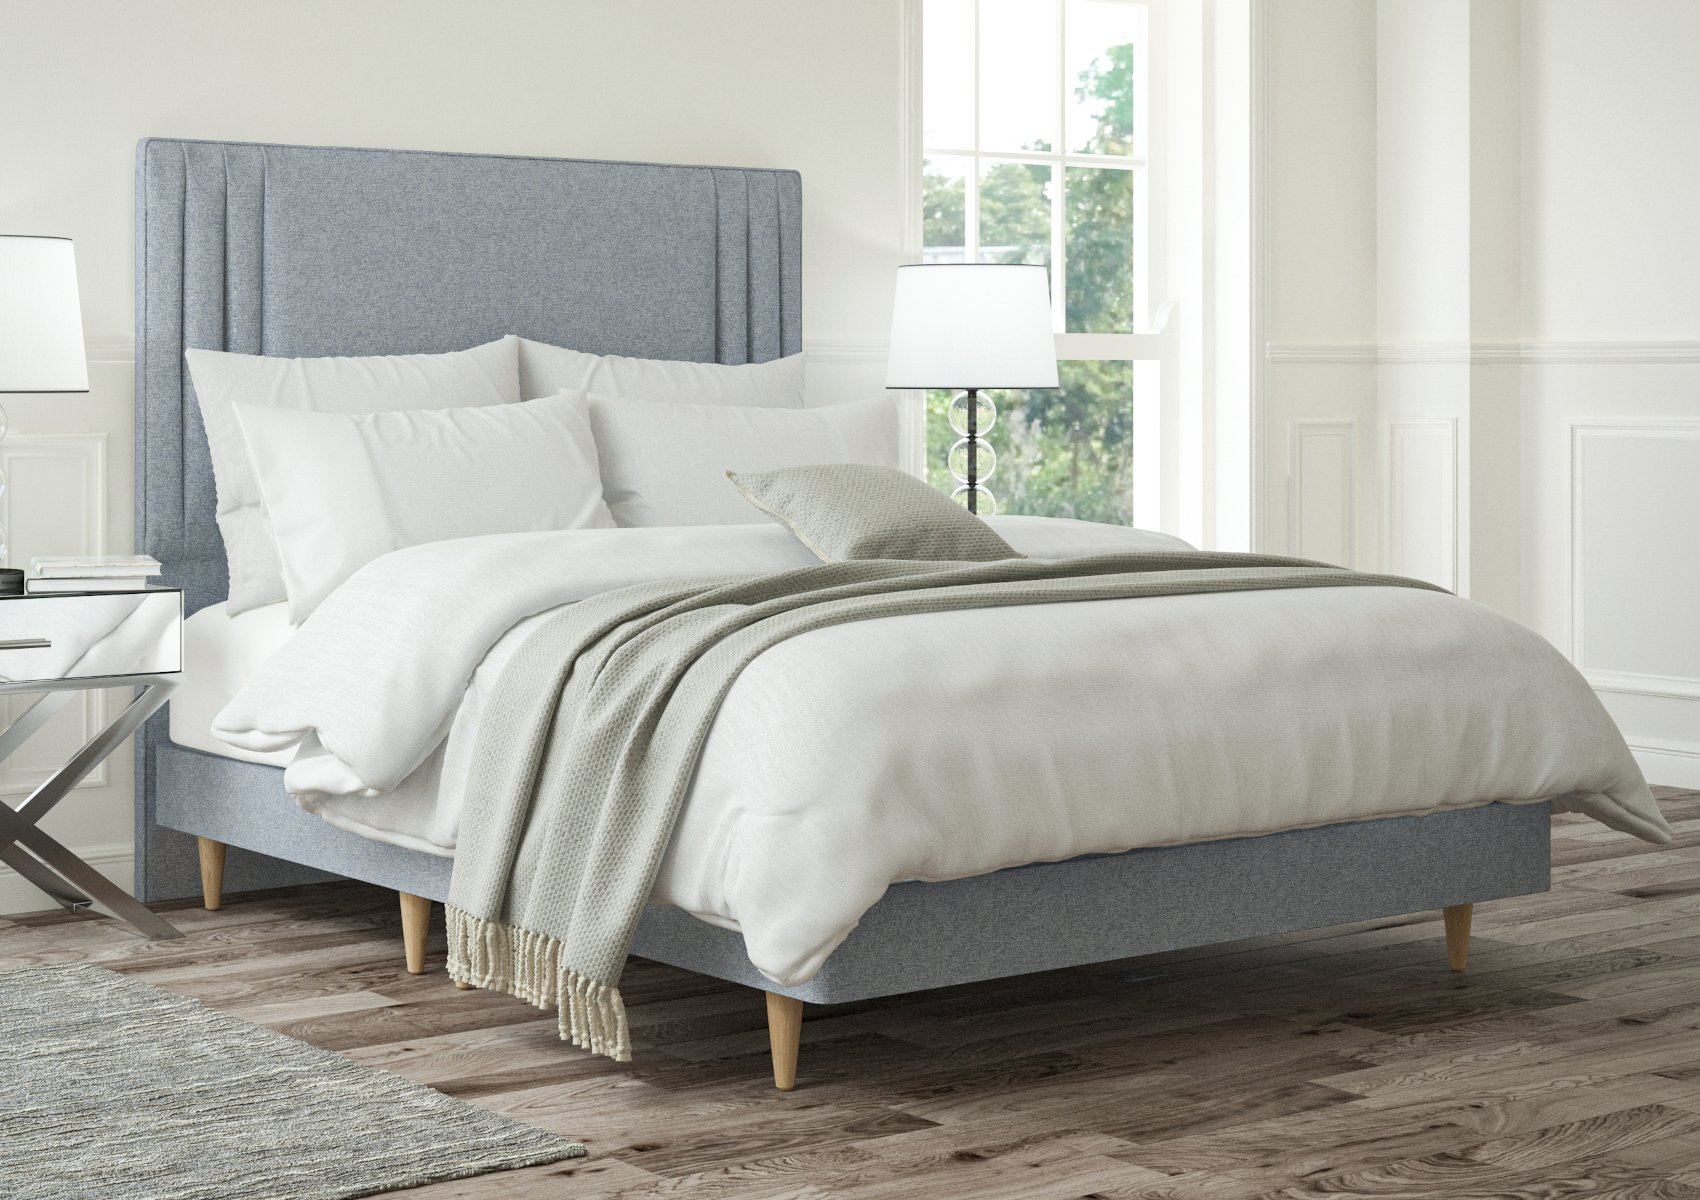 View Faith Arran Pebble Upholstered Super King Bed Time4Sleep information